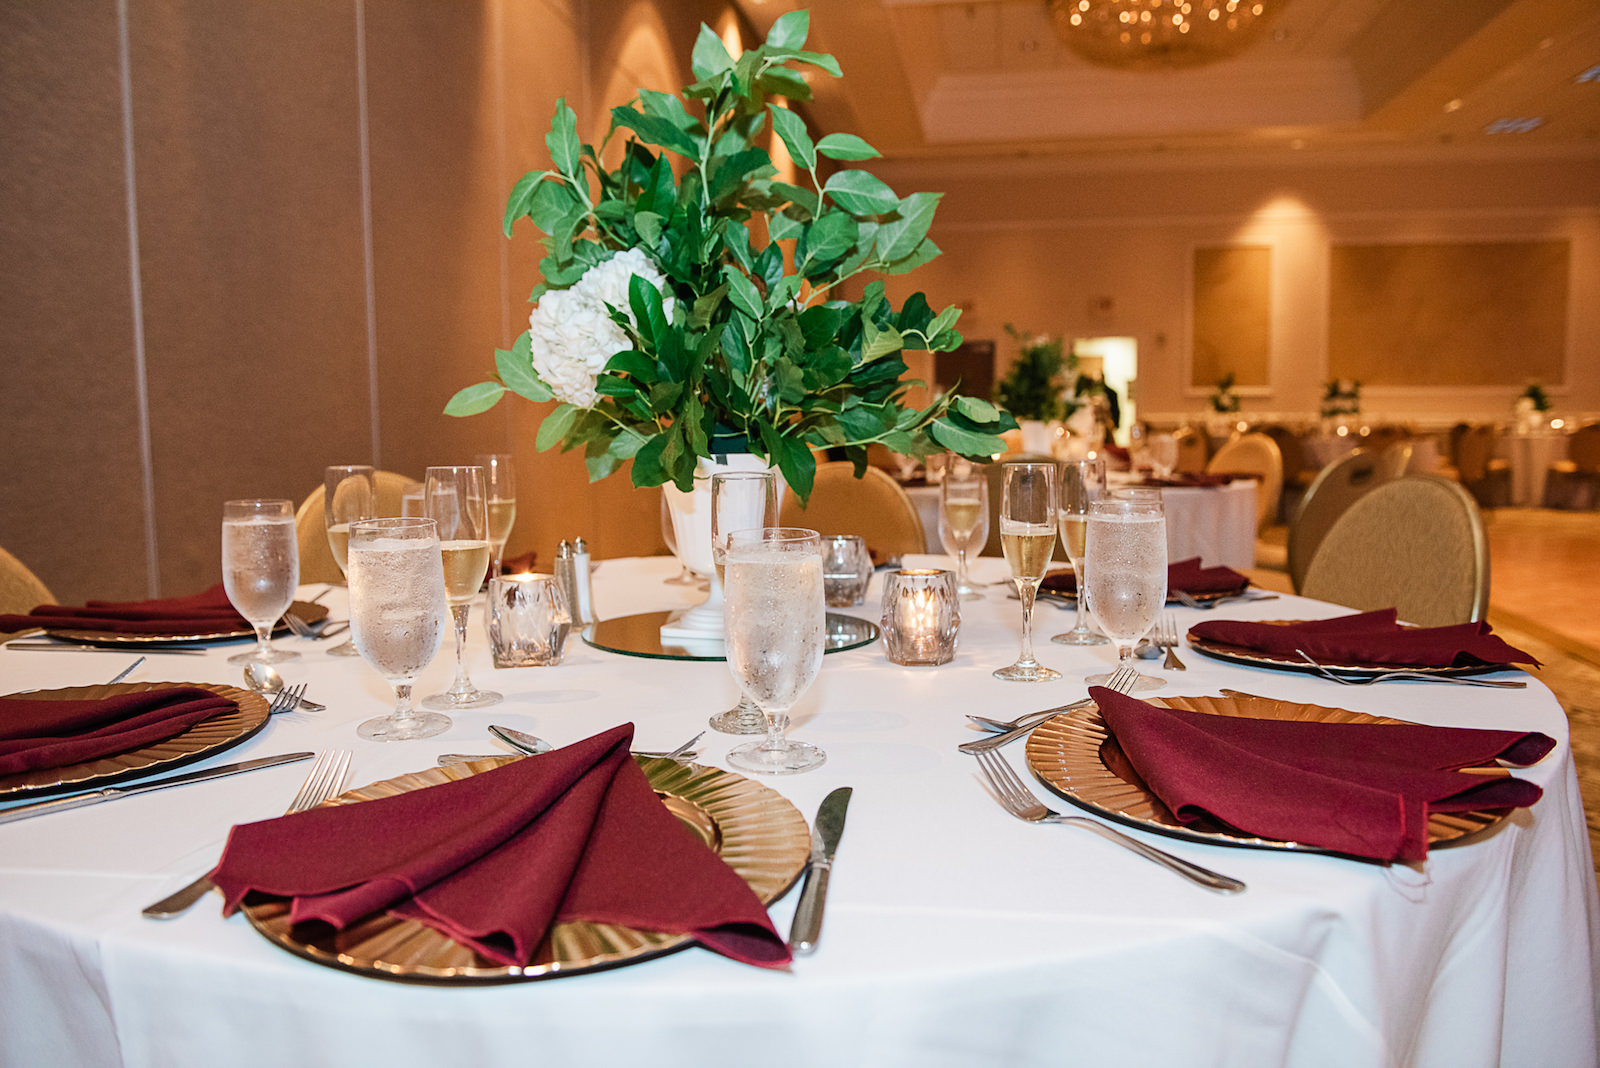 Burgundy Napkin with Gold Charger Wedding Tablescape and Greenery Centerpieces